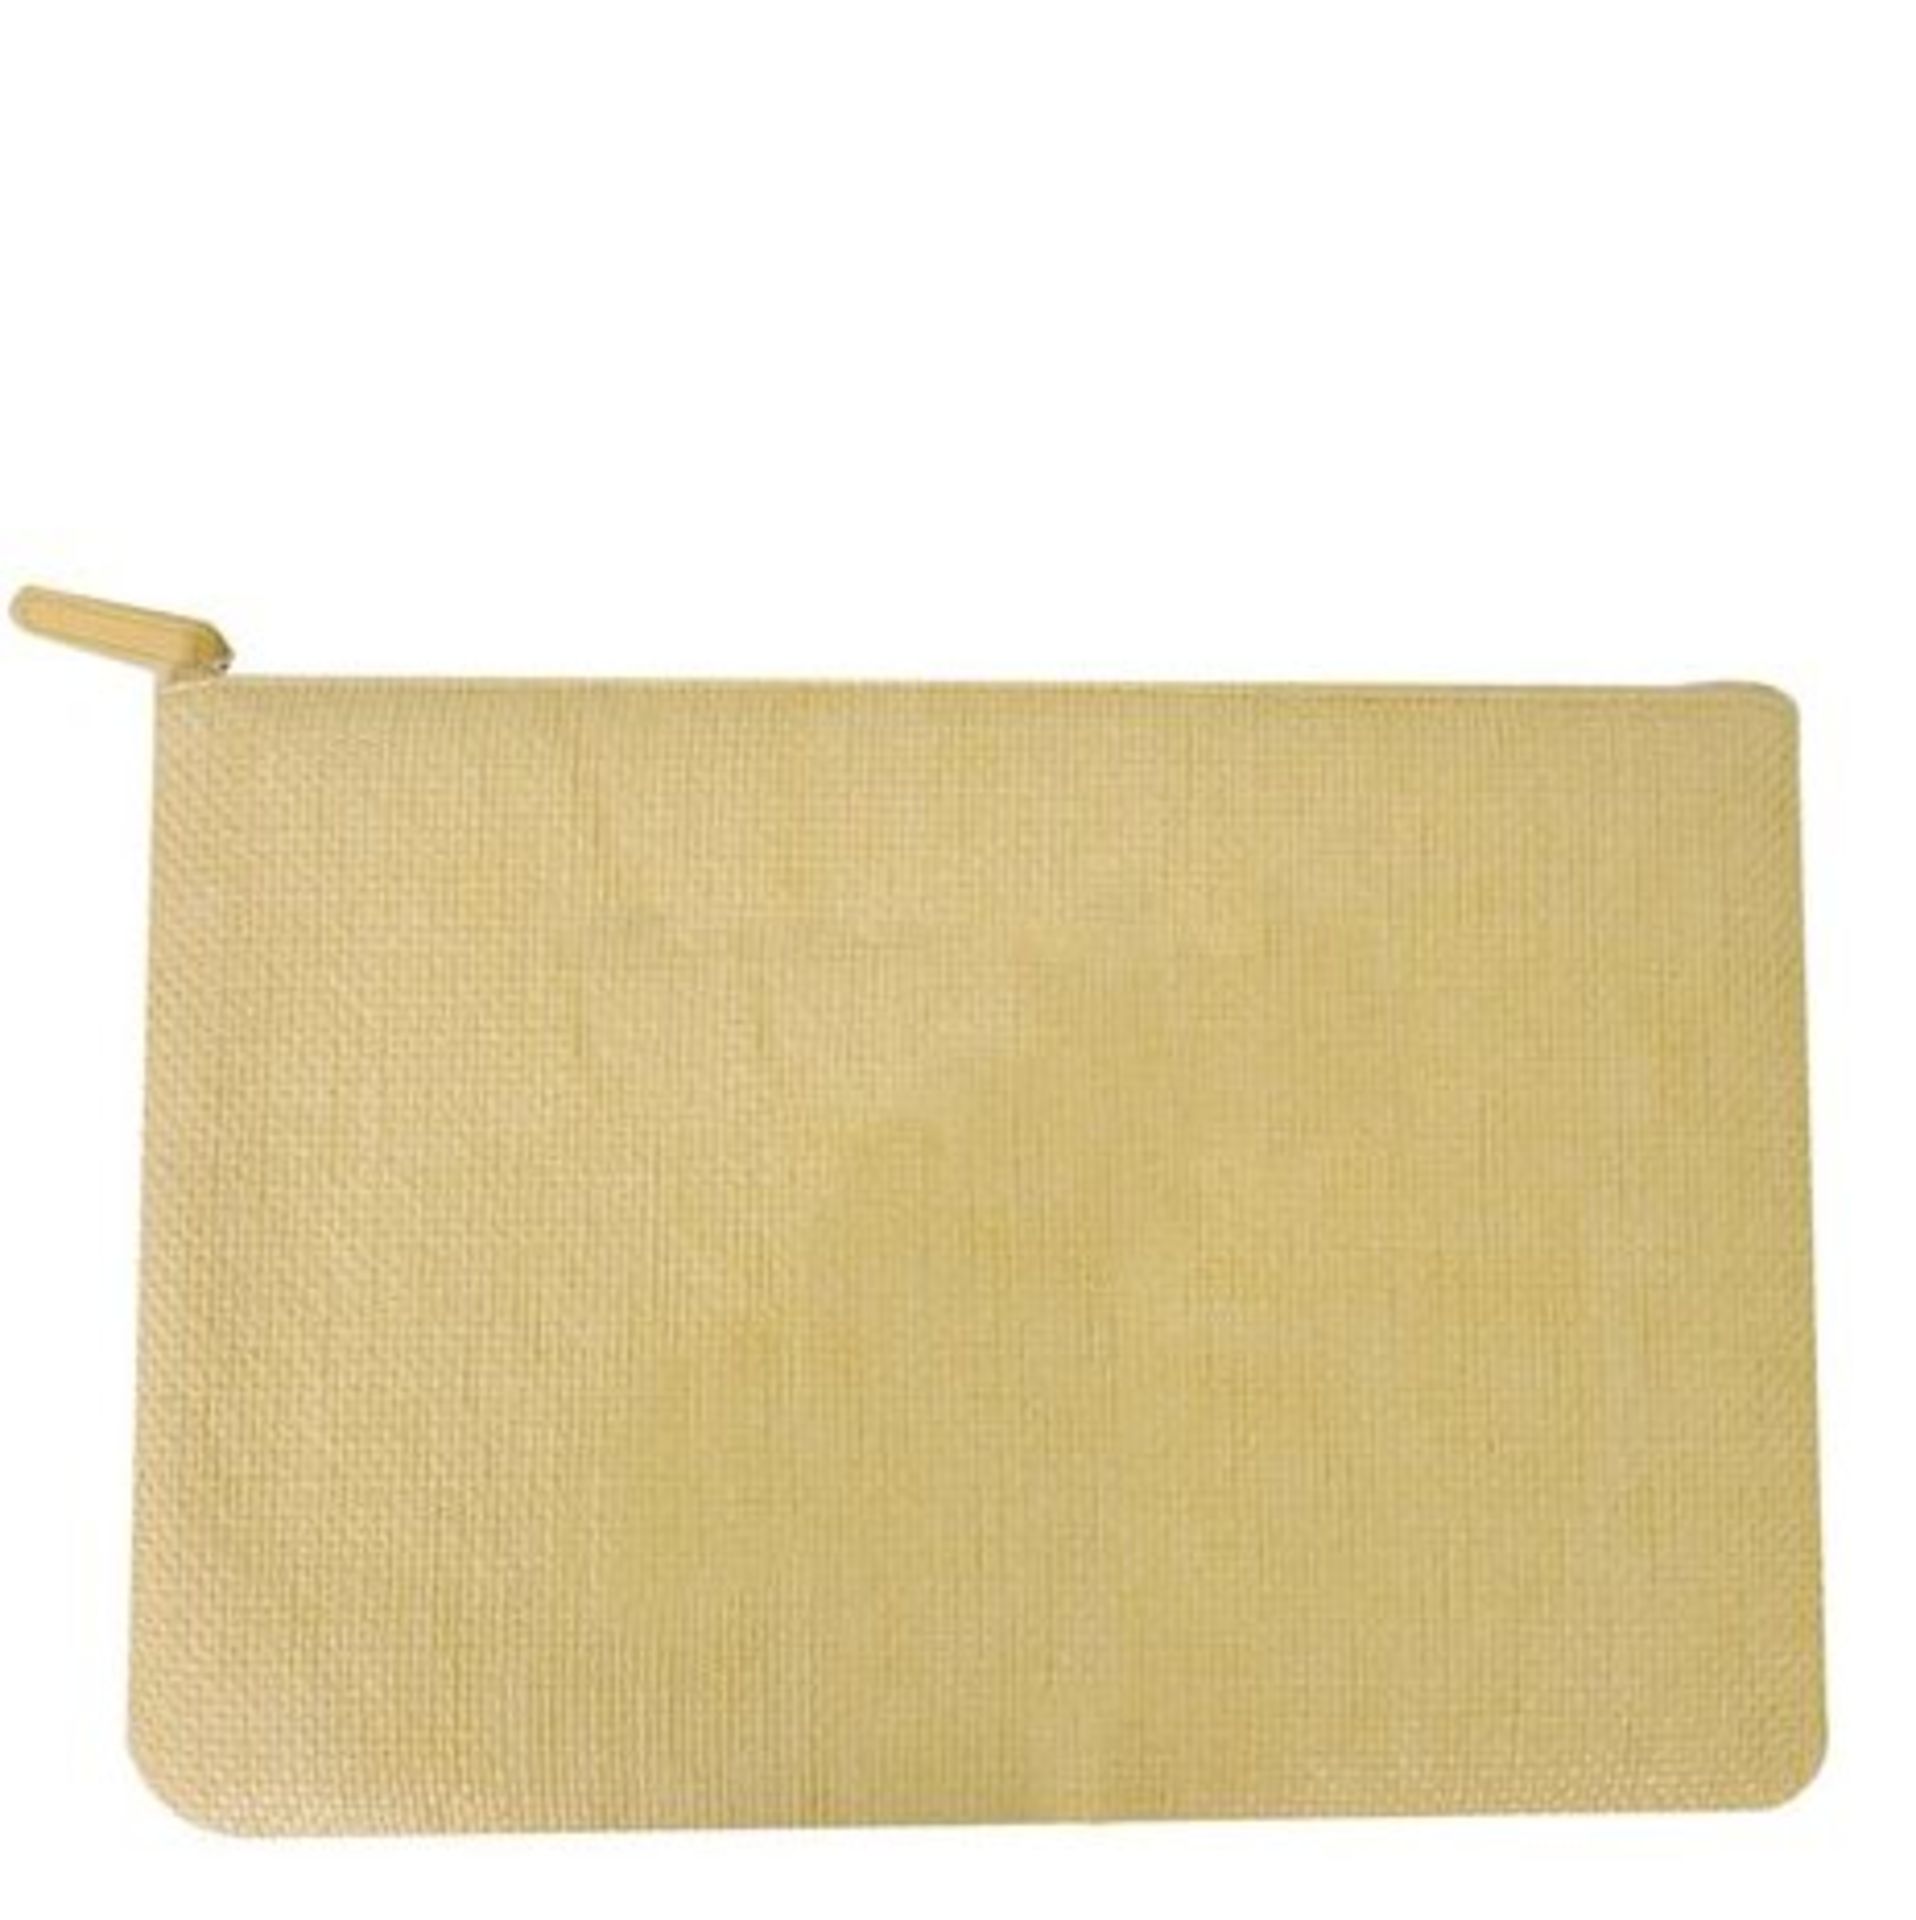 Chanel - Deauville Canvas Clutch - Image 3 of 5